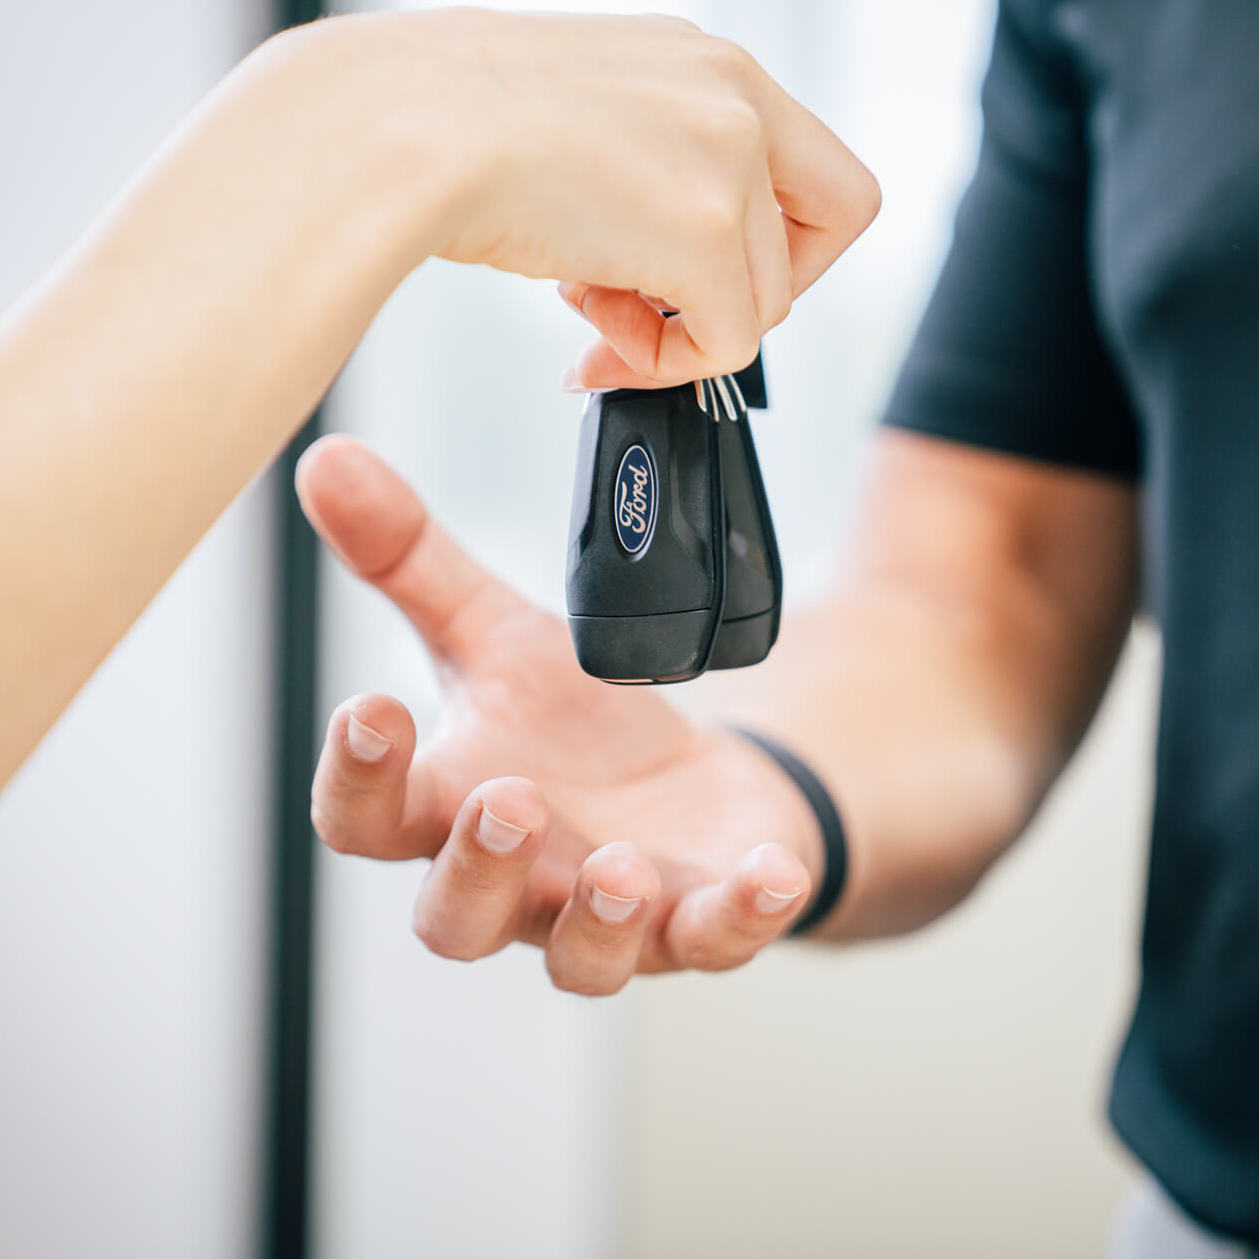 A person handing a car key to another person at home.